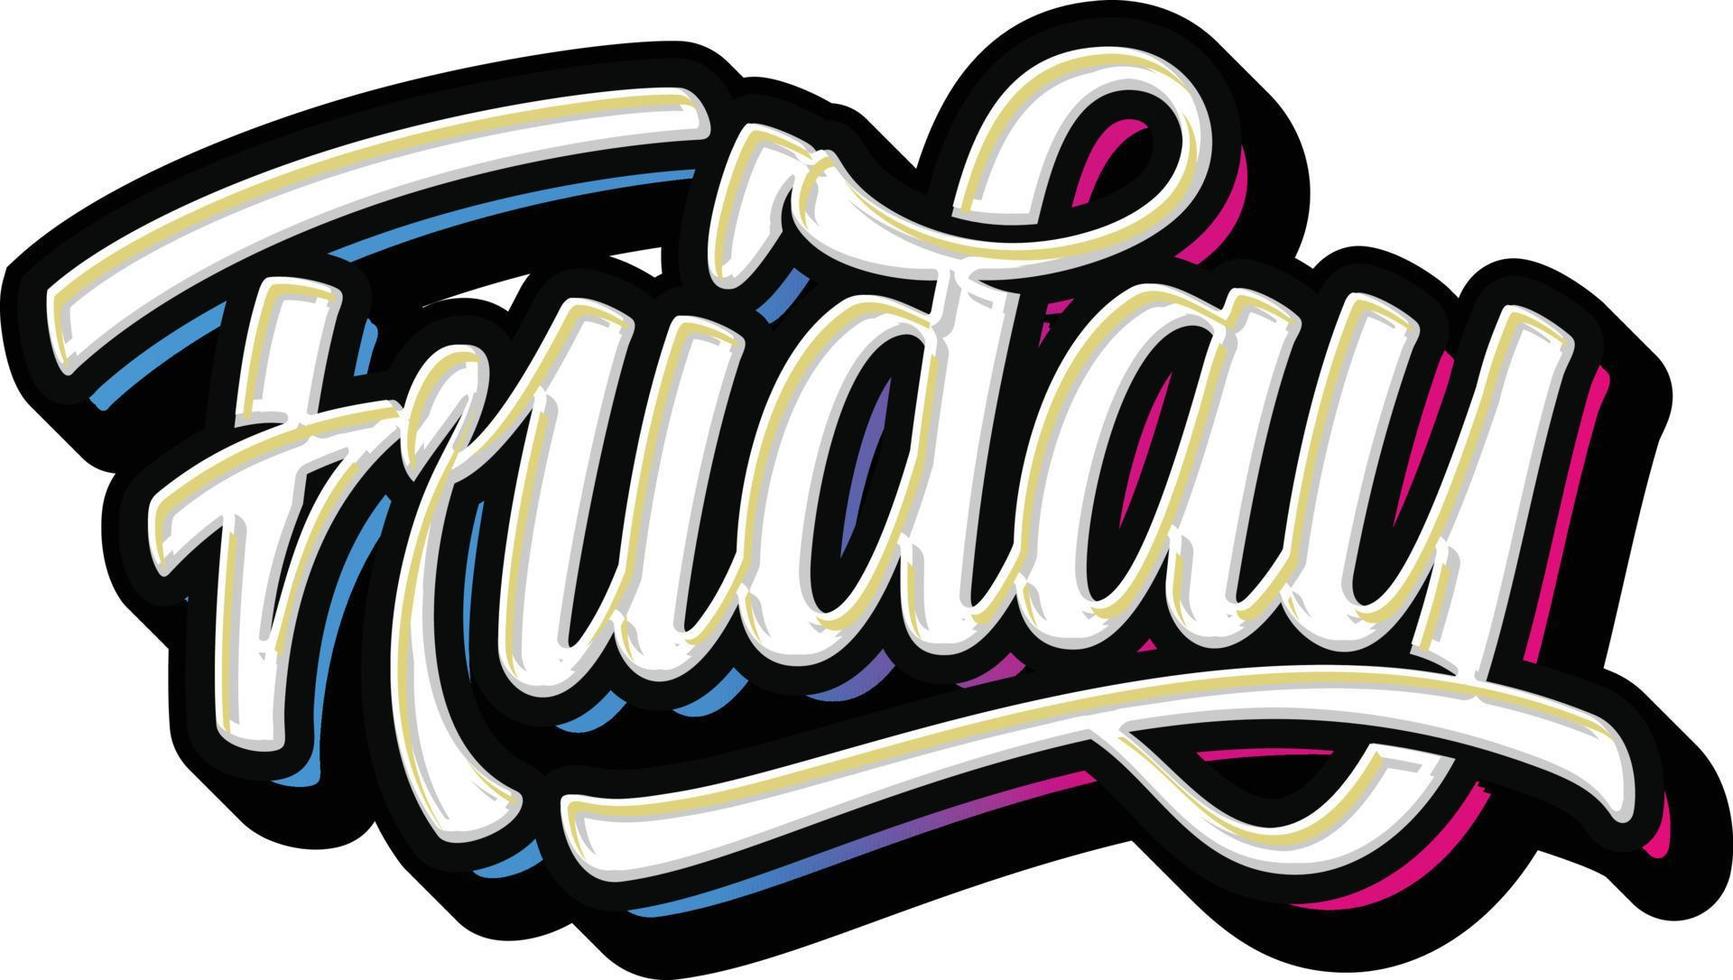 Friday Lettering Typography vector